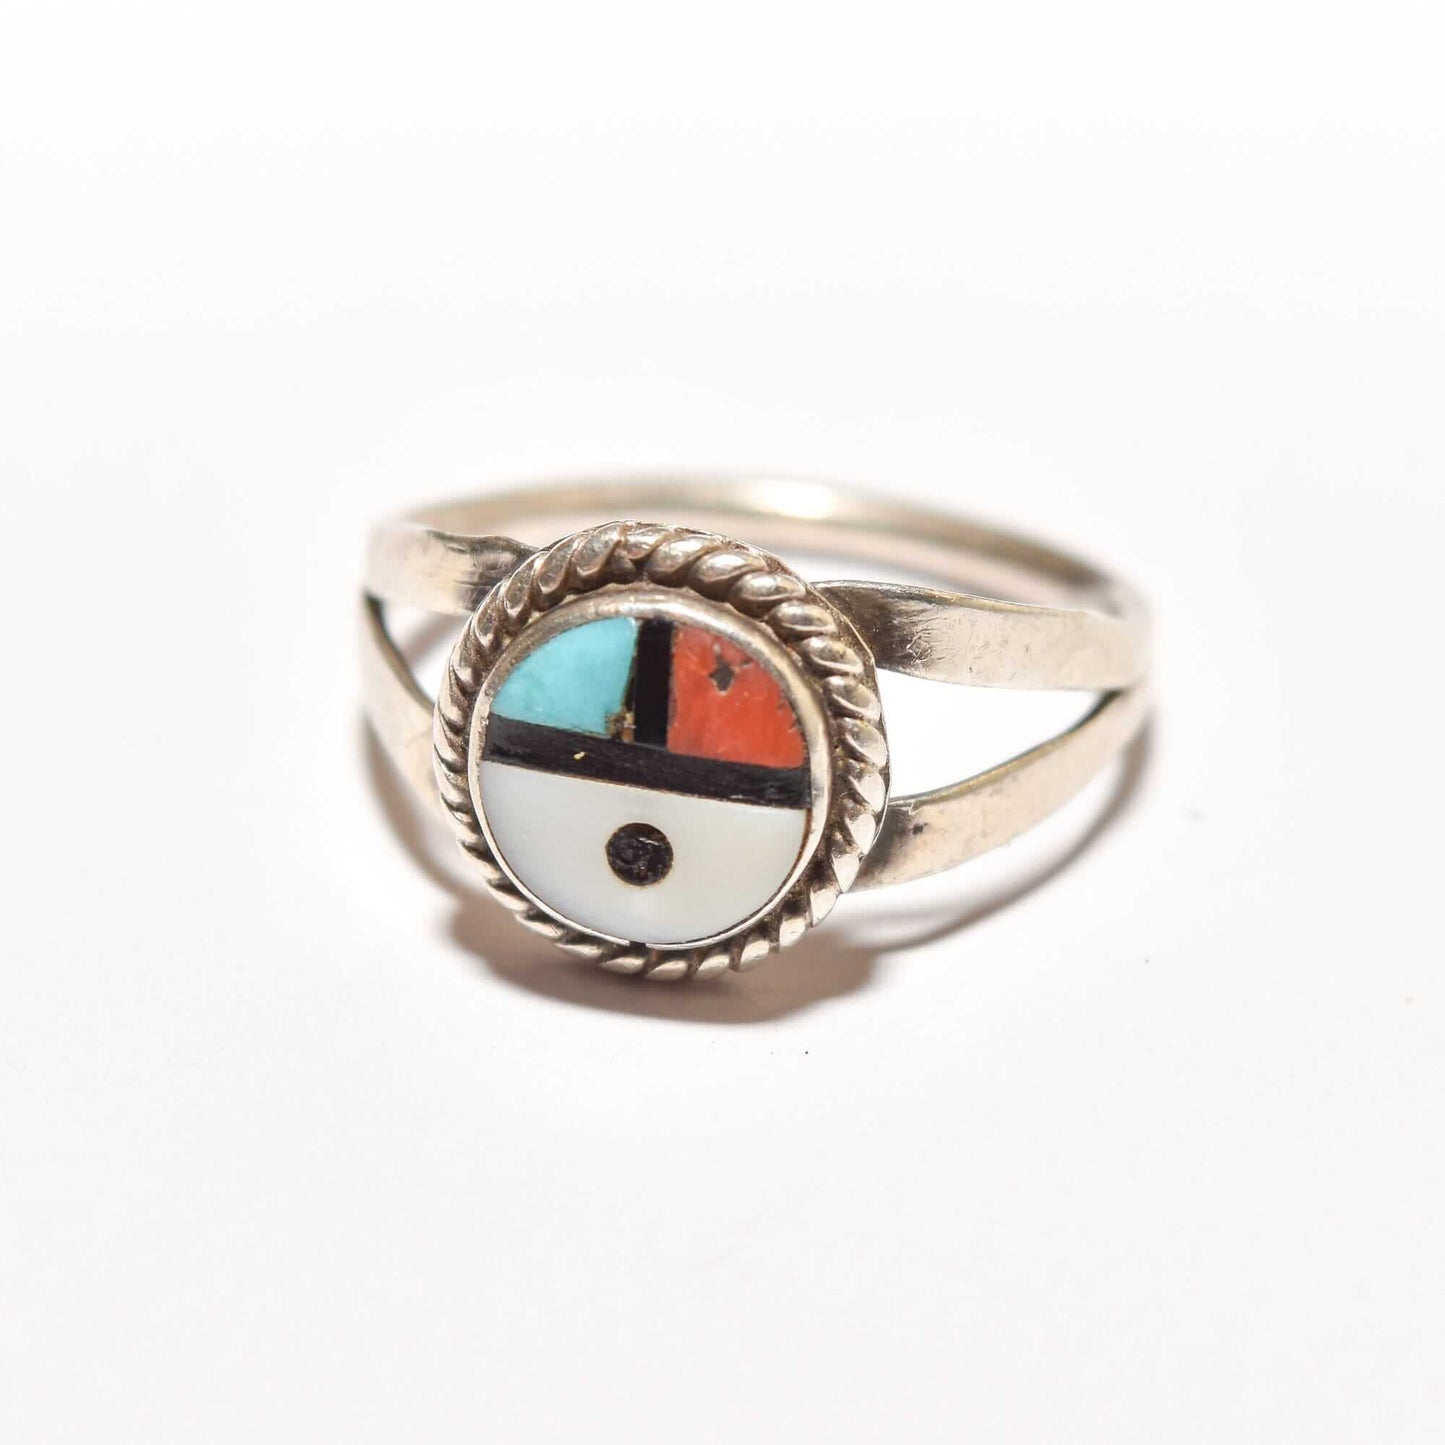 Little Zuni Sun Face Ring in Sterling Silver, Native American Handcrafted Jewelry, Multicolored Enamel Stacking Ring, Size 5.25 US